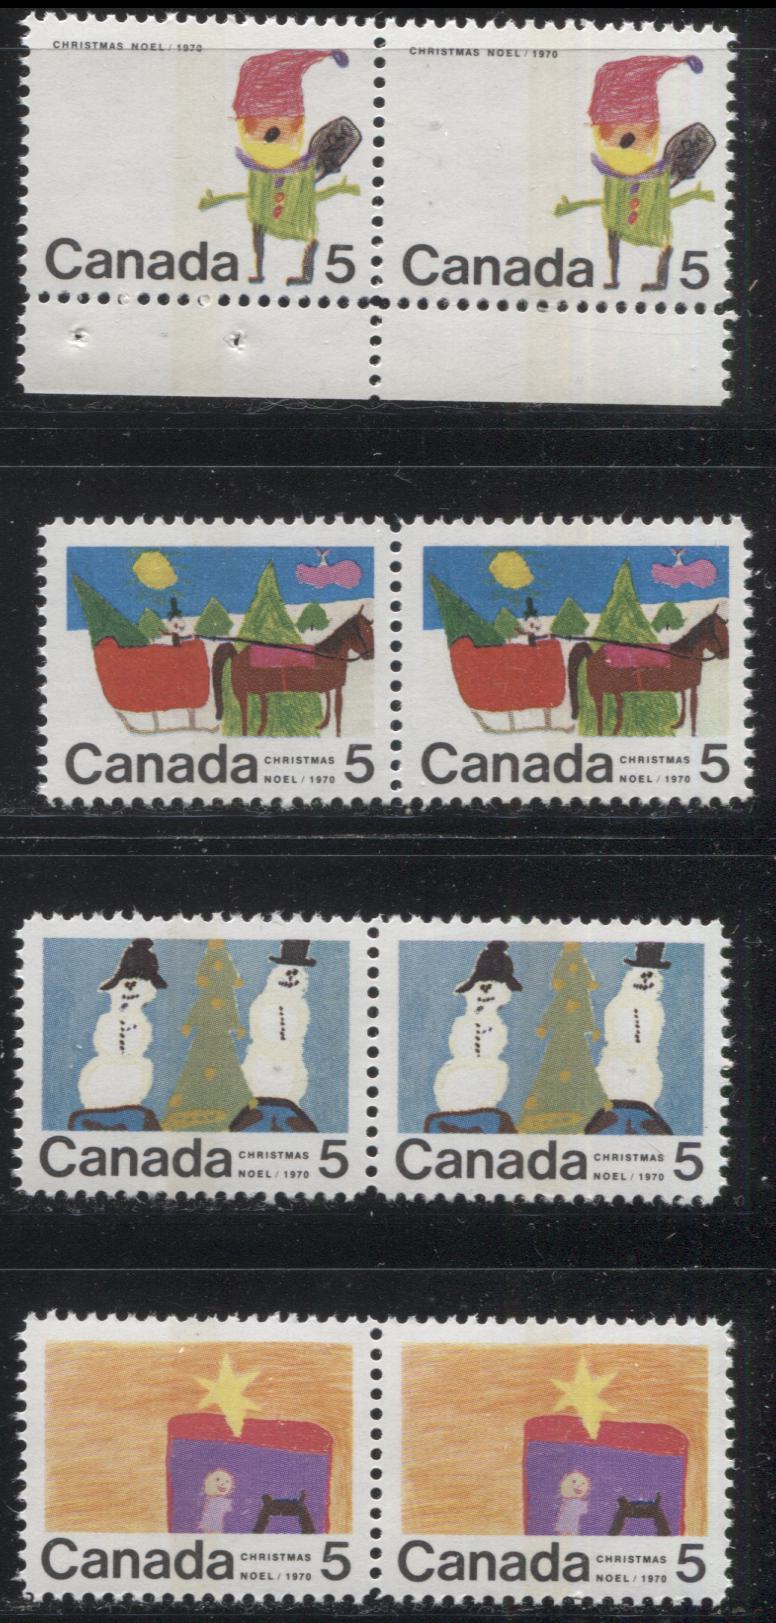 Lot 112 Canada #522i 5c Multicoloured Children Skiing, 1970 Christmas Issue, a VFNH Centre Block of 4 on HB11 Smooth Paper, With Dot Between "MA" of "Christmas" on LR Stamp, Perf. 11.9